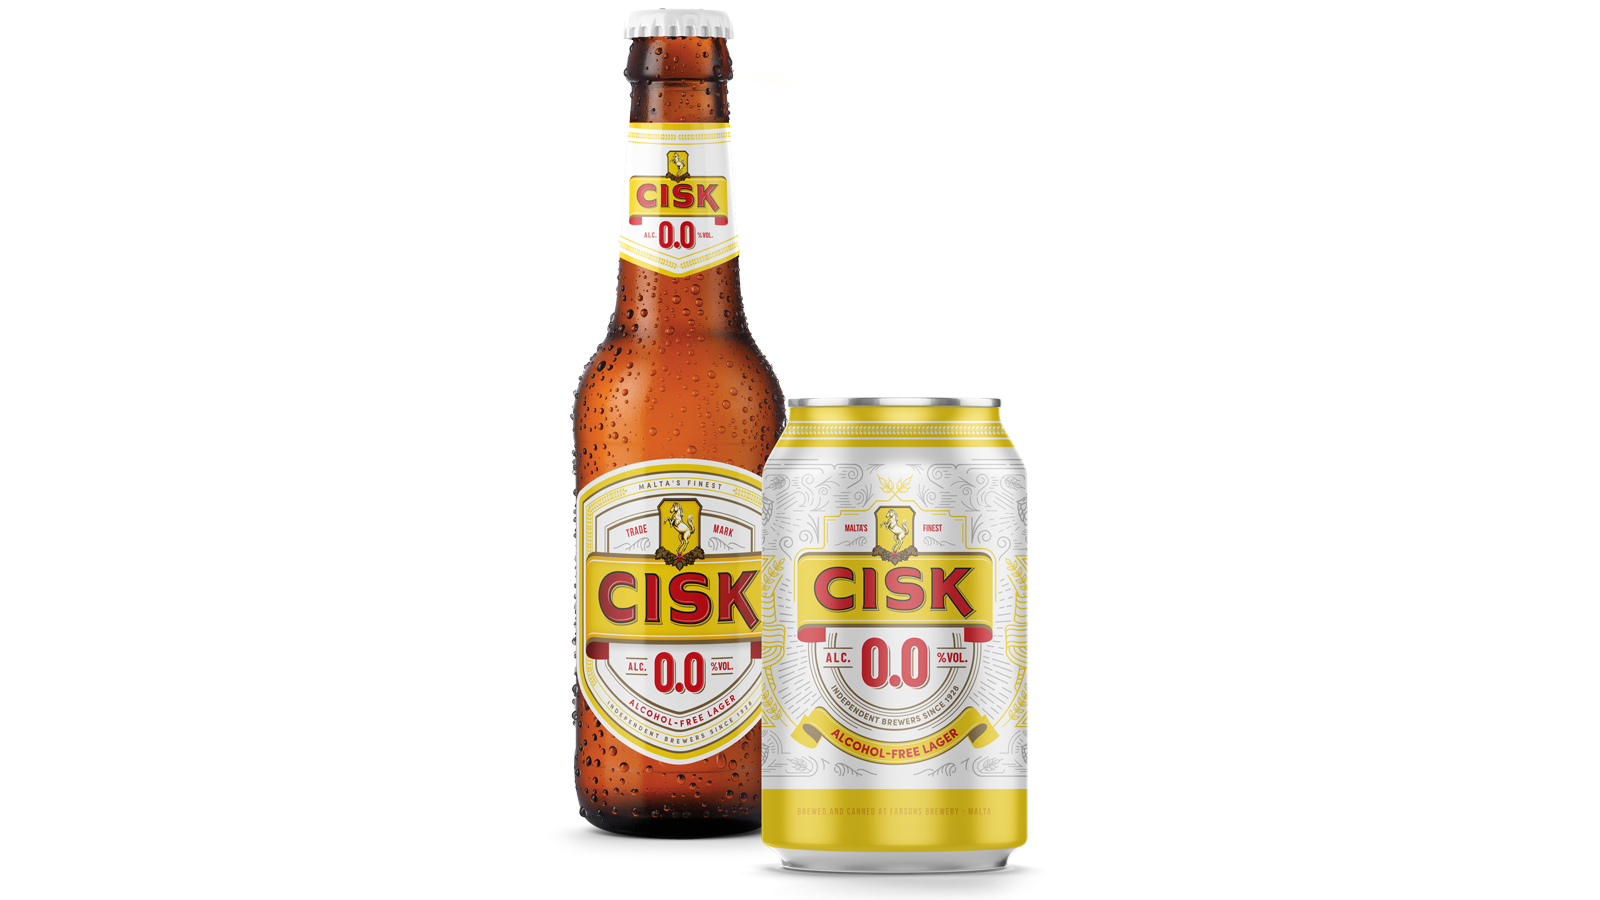 Cisk 0.0 crowned Gold medal winner at brewing industry ‘Oscars’  